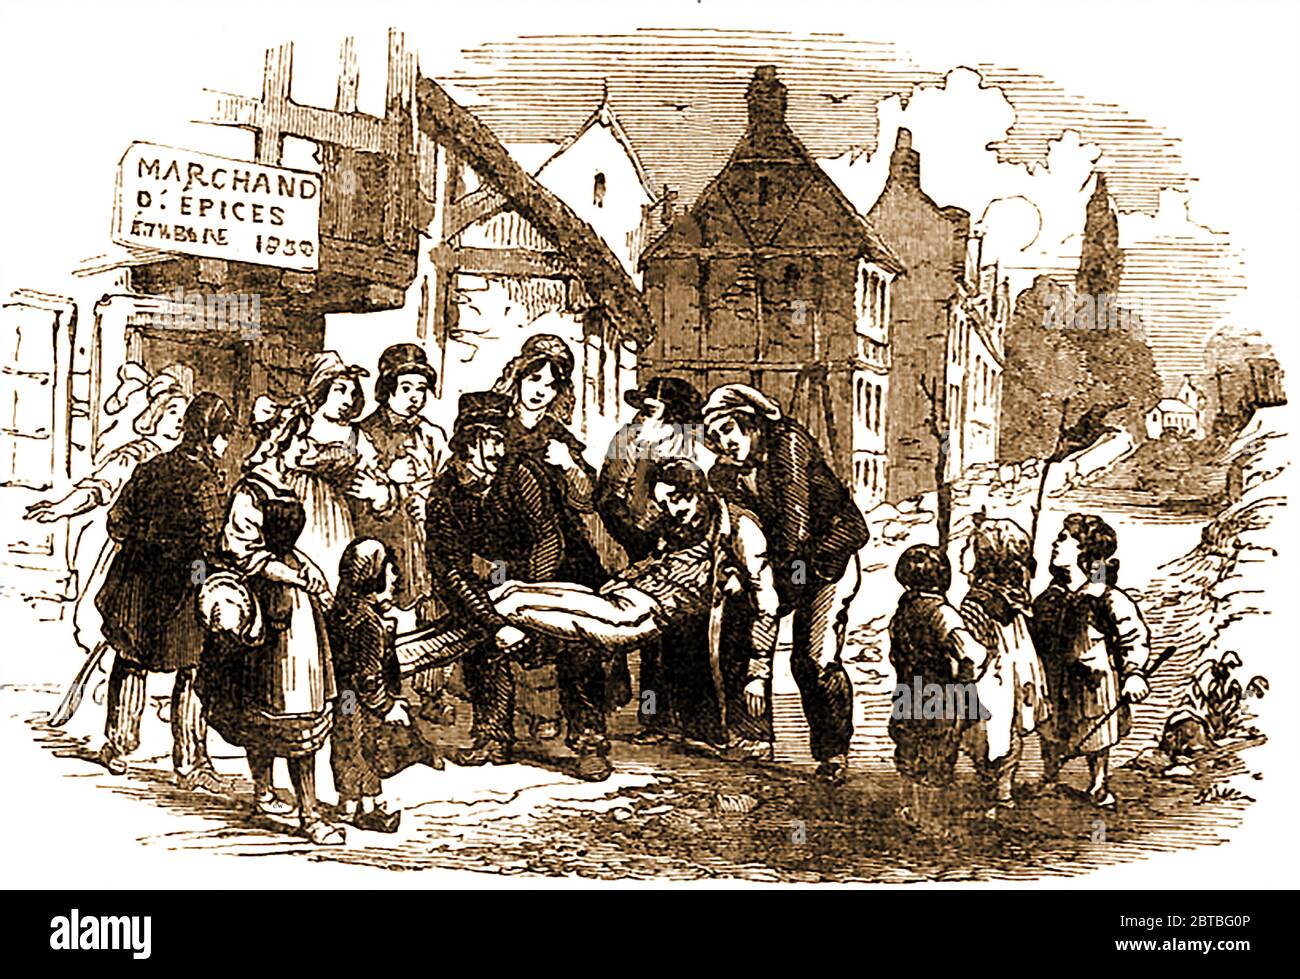 Prince Ferdinand Philippe of Orléans (1810-1842)   -  This old engraving shows the scene immediately after the accident leading to the death of the Duke of Orleans  in France after leaping from a runaway carriage. Passers-by carry him unconscious to a nearby grocers. It is said he fractured his skull after leaping from his open carriage when the horses bolted. (1842 illustration). Stock Photo